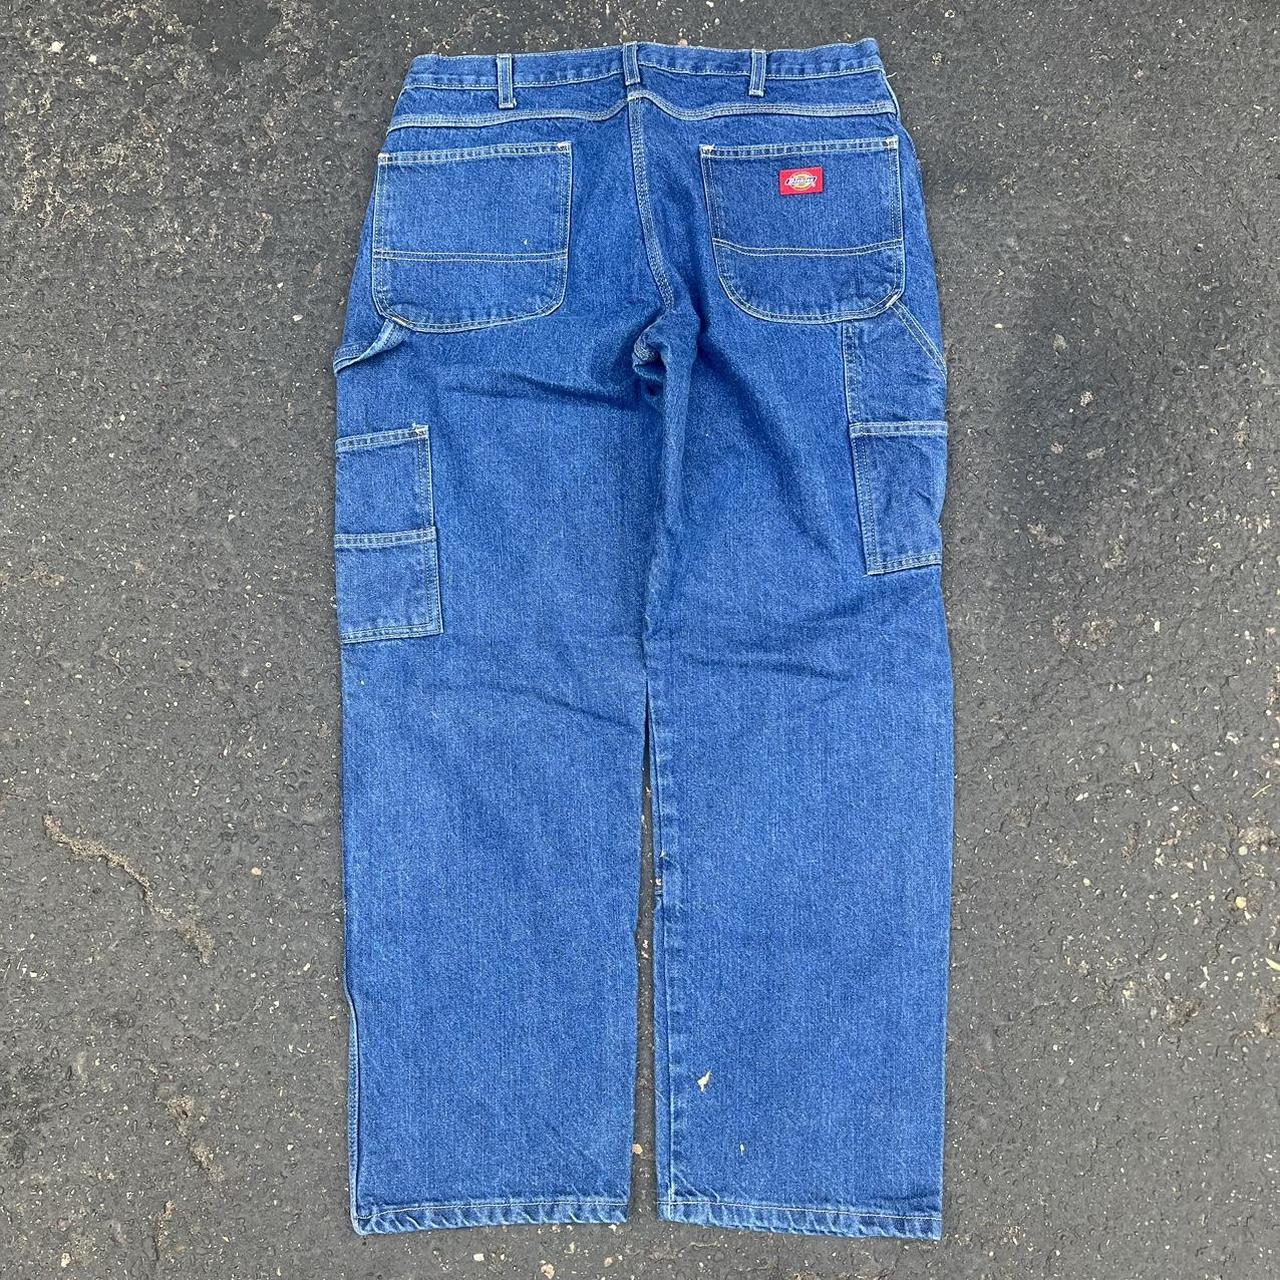 Dickies Men's Blue and White Jeans | Depop